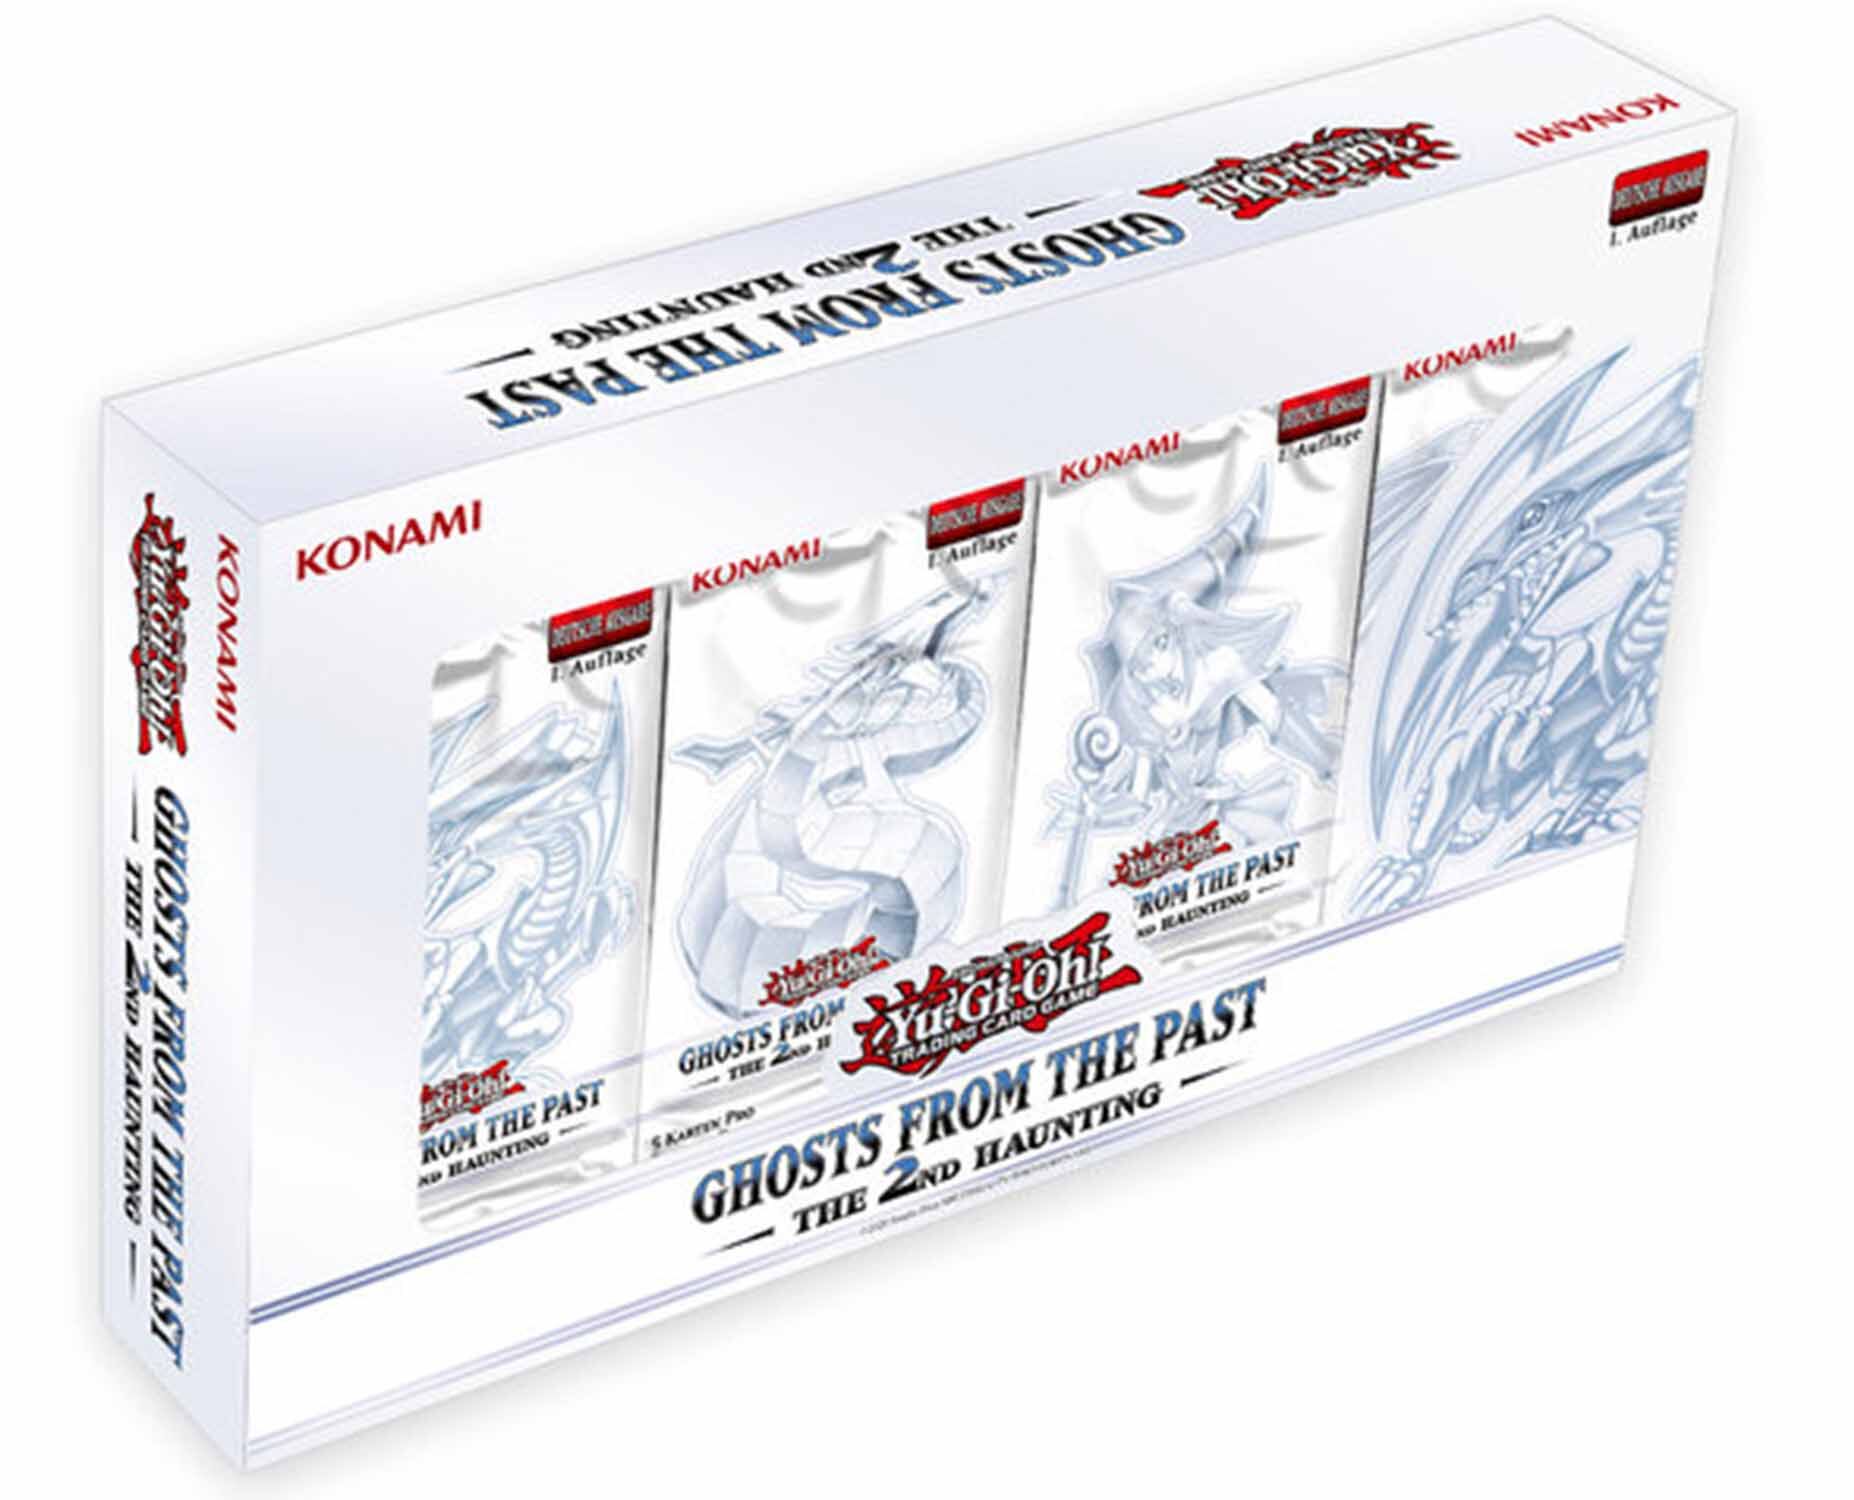 Ghosts From the Past - The 2nd Haunting Collection Box - 1. Auflage - Yu-Gi-Oh! - DE